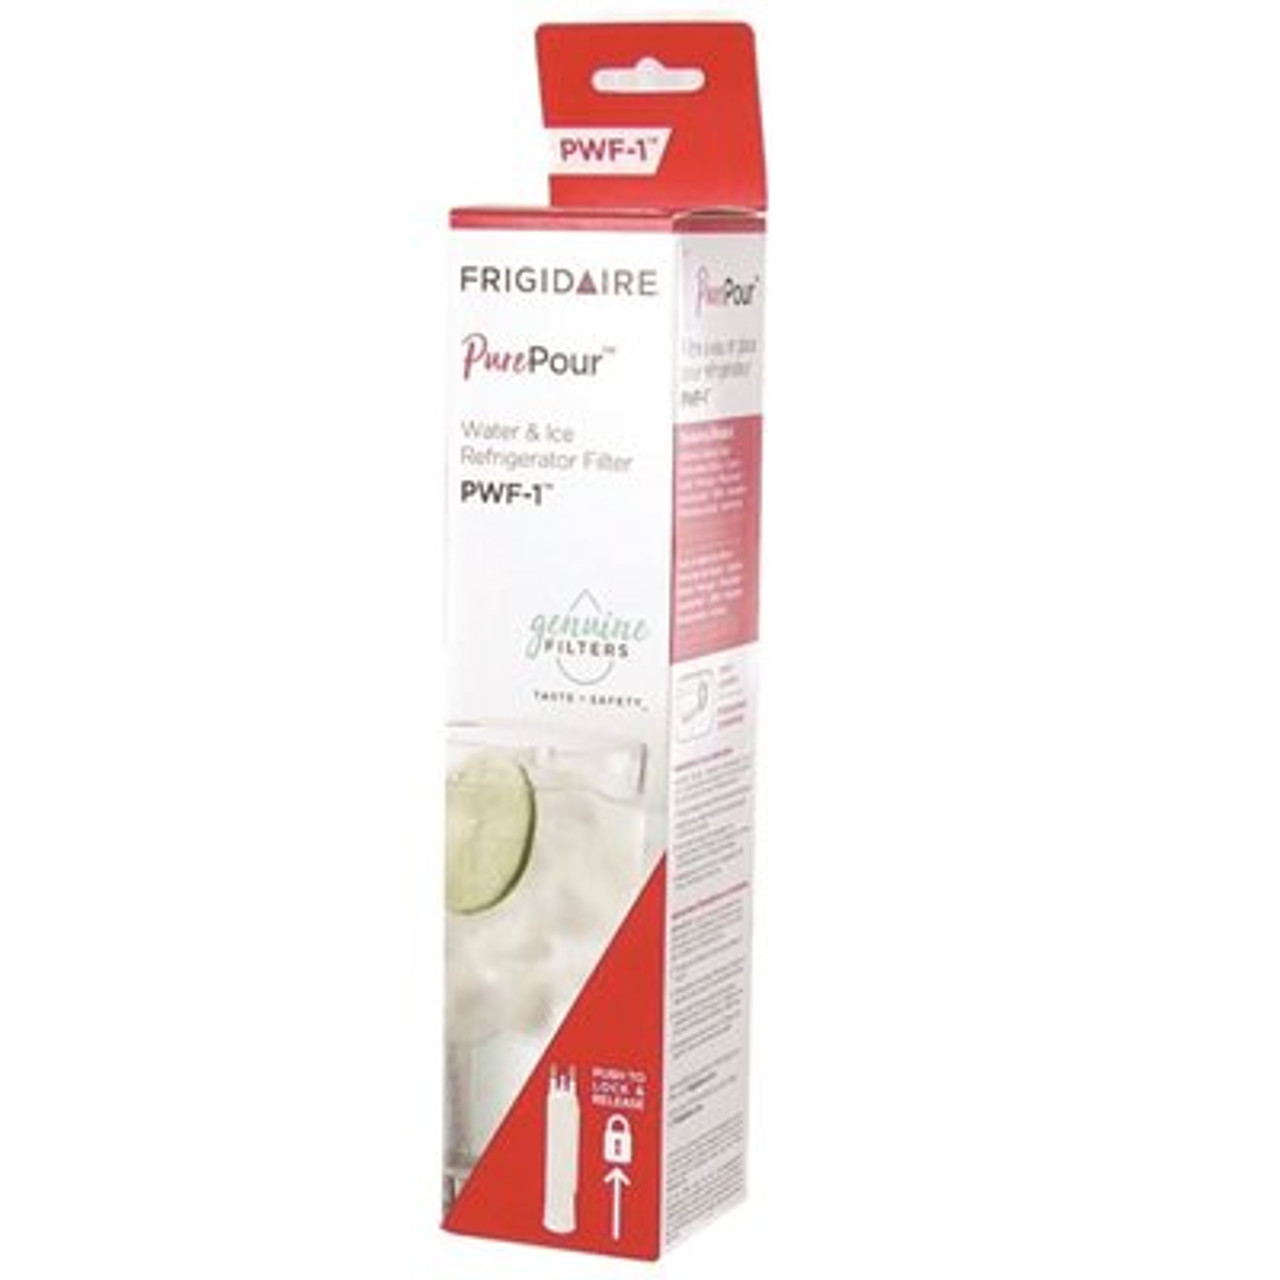 Frigidaire Pure Pour Water And Ice Refrigerator Filter